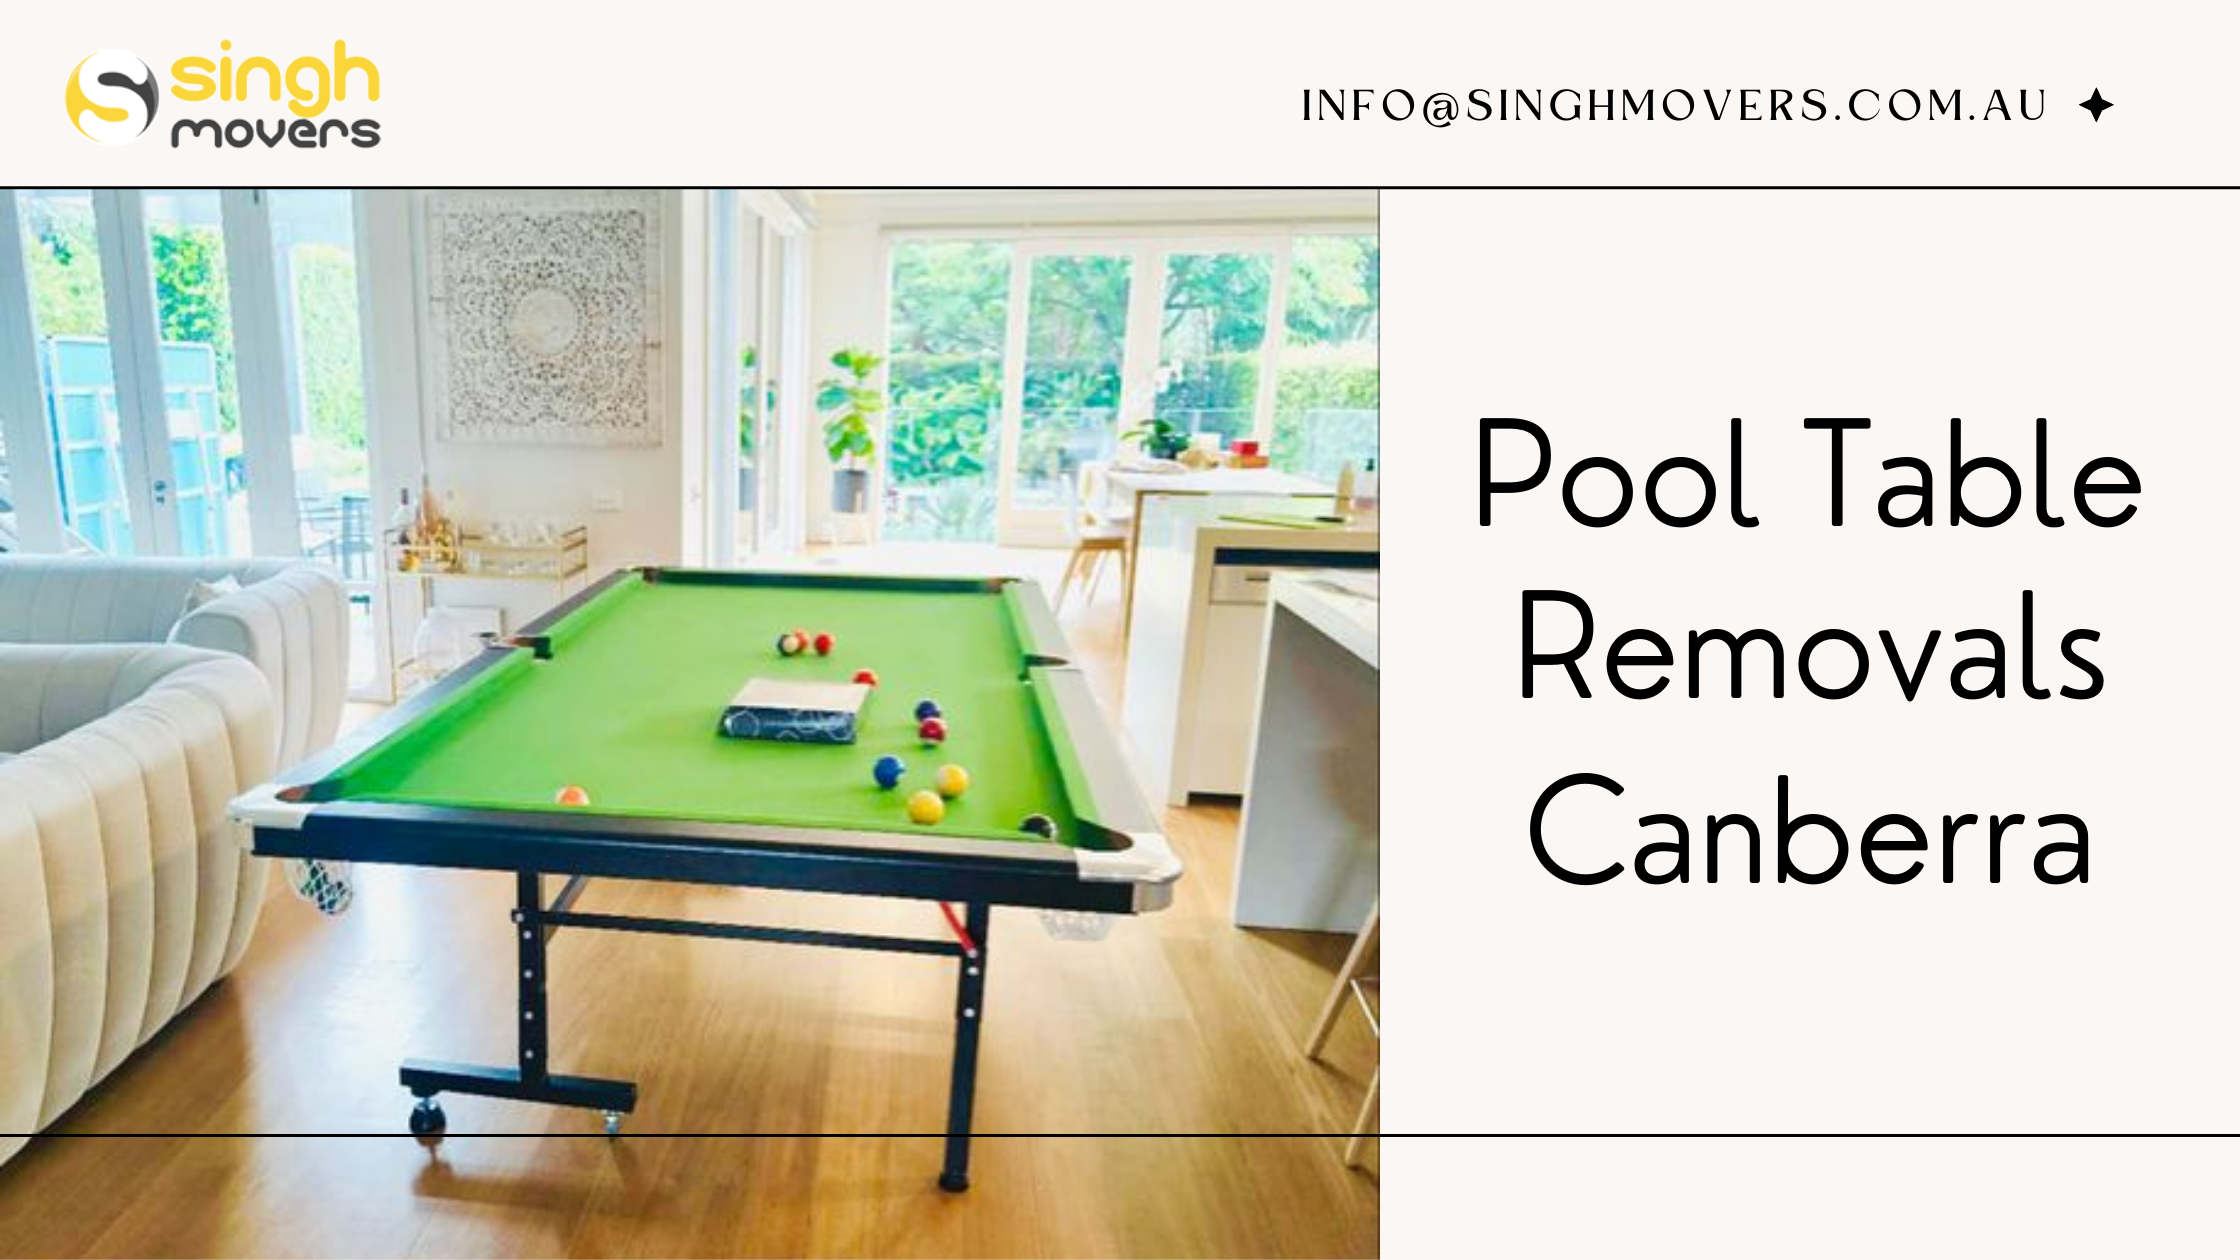 Pool Table Removals Canberra